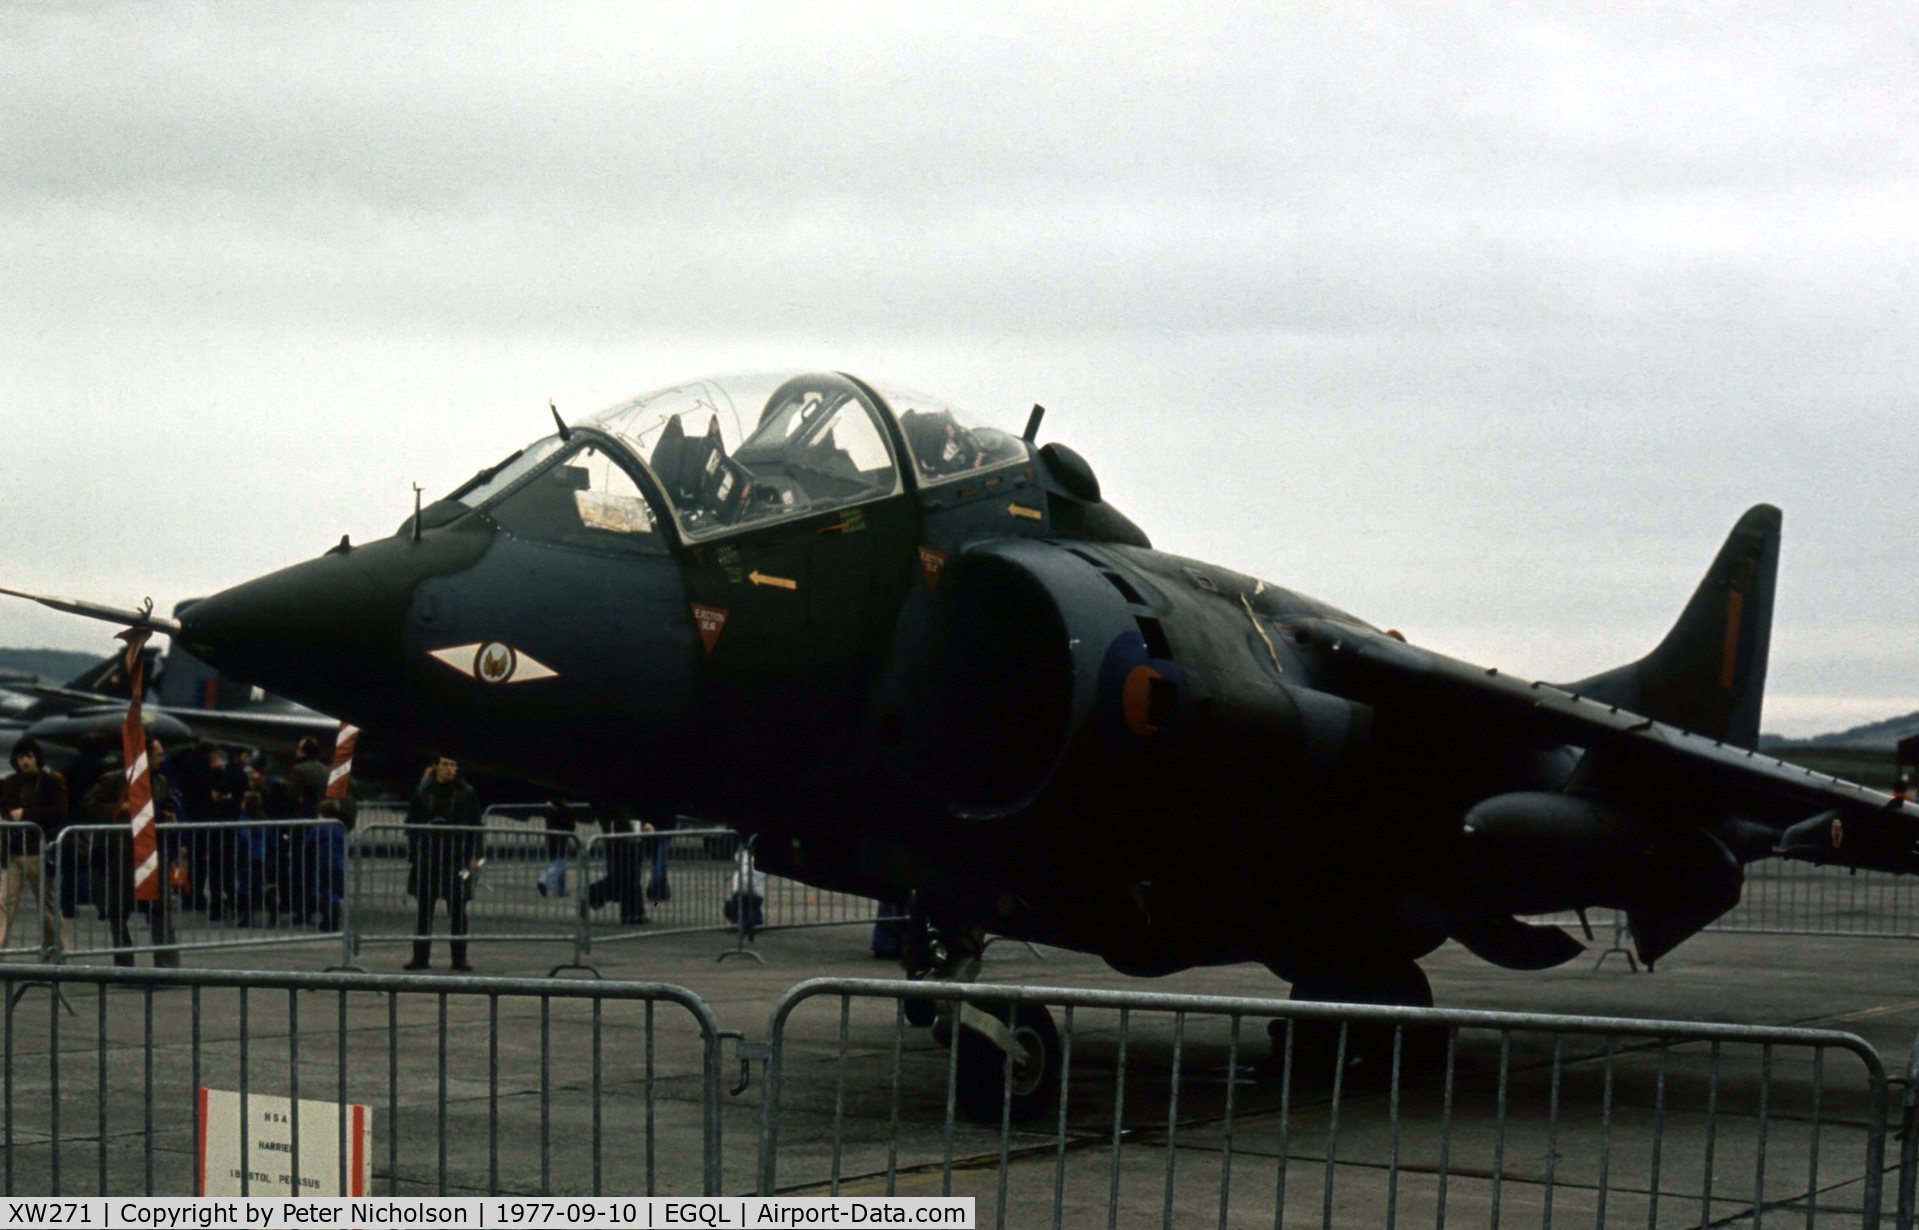 XW271, 1971 Hawker Siddeley Harrier T.4 C/N 212010, Harrier T.4 of 1 Squadron in the static park at the 1977 RAF Leuchars Airshow.